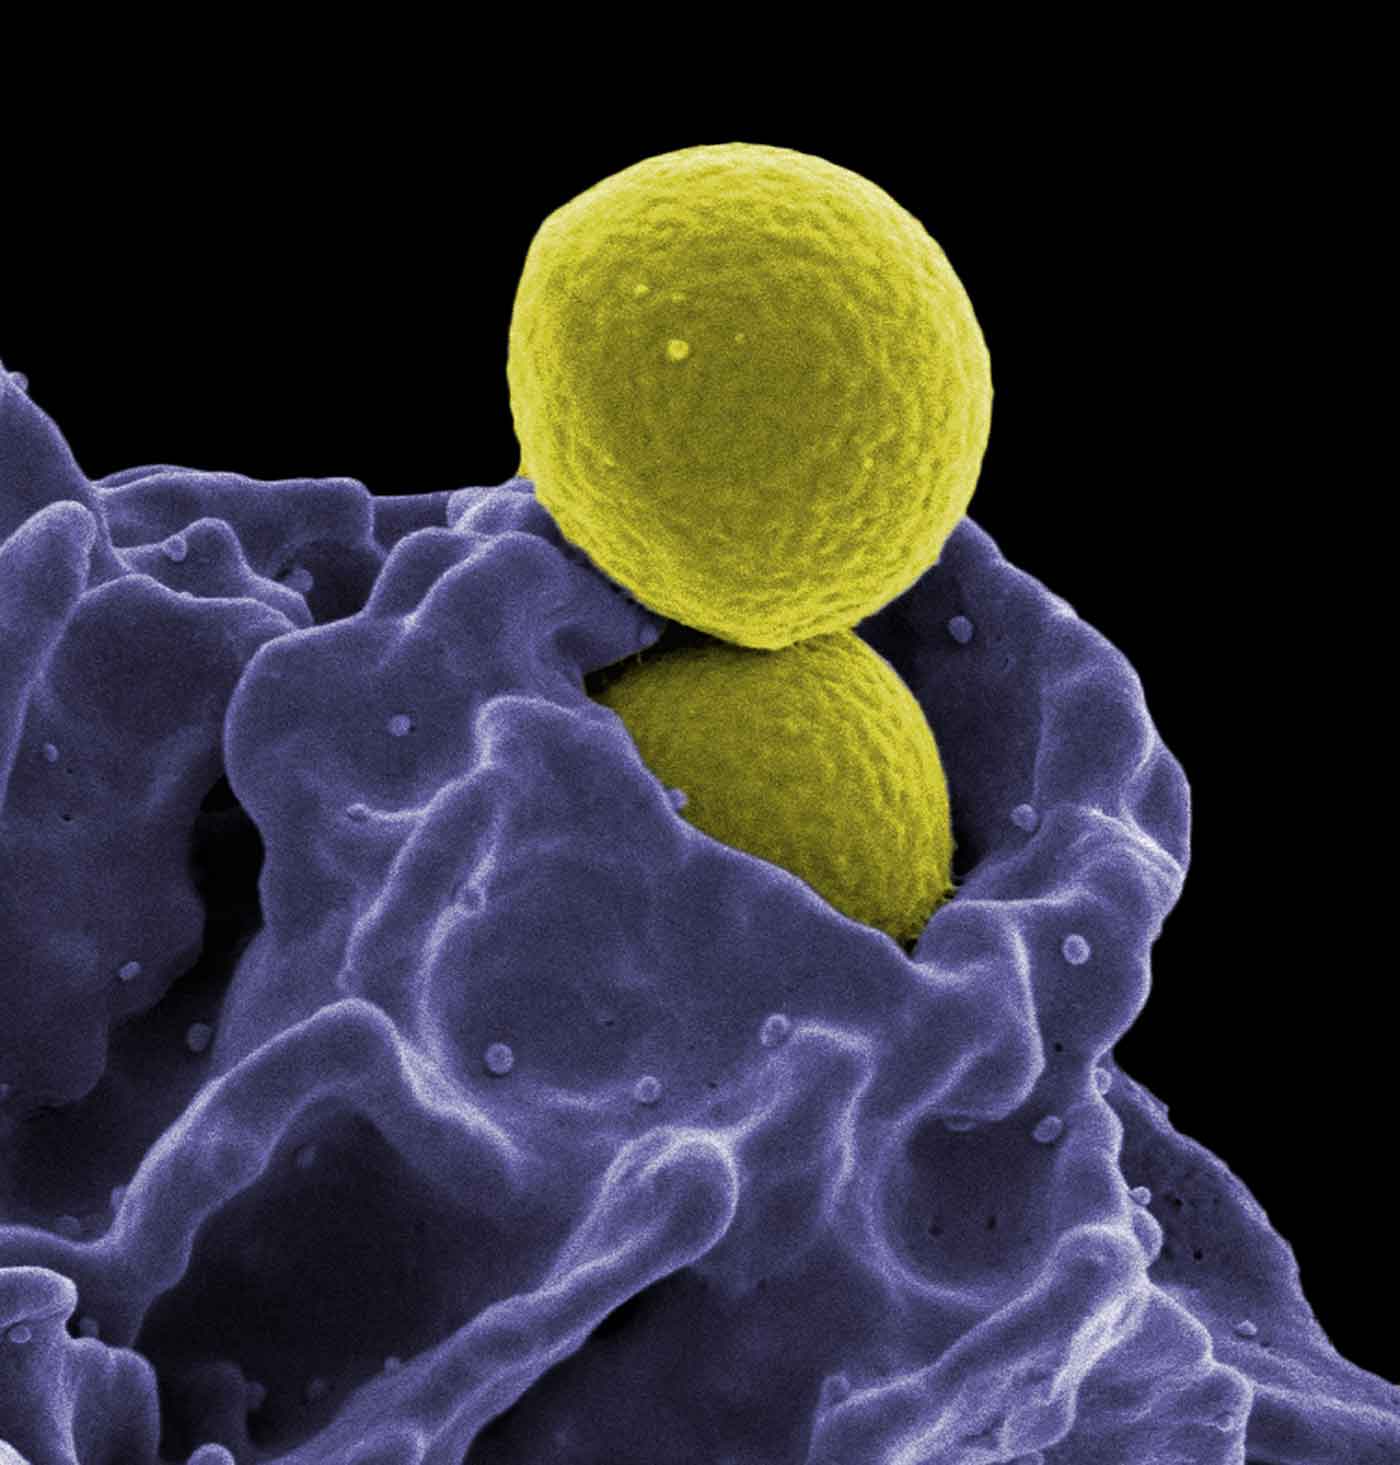 A bacterium being ingested by an immune cell.